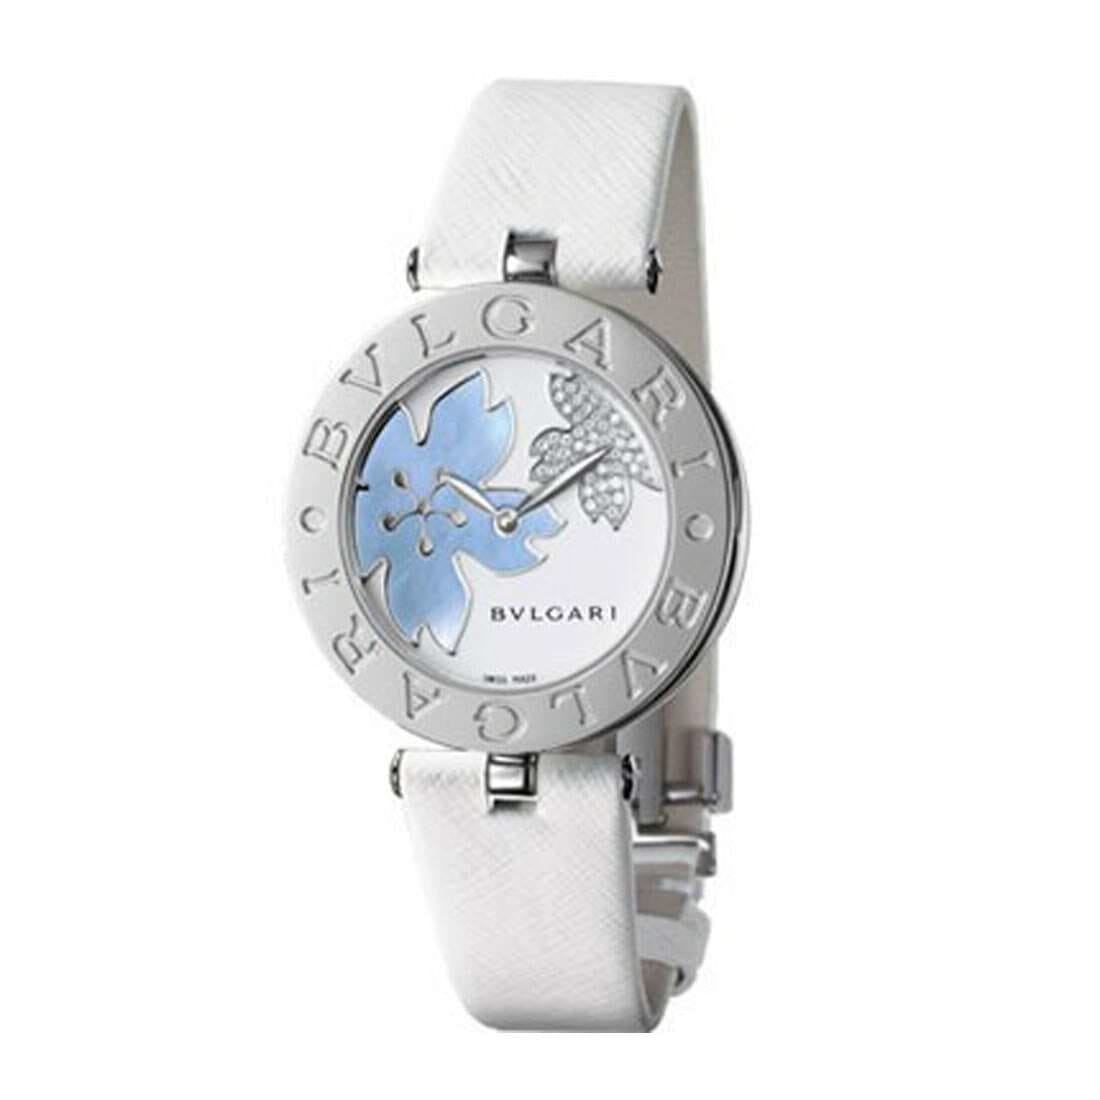 Bvlgari 101900 BZ30FDSL B.Zero1 Mother of Pearl Flower Motif Dial White Leather Watch